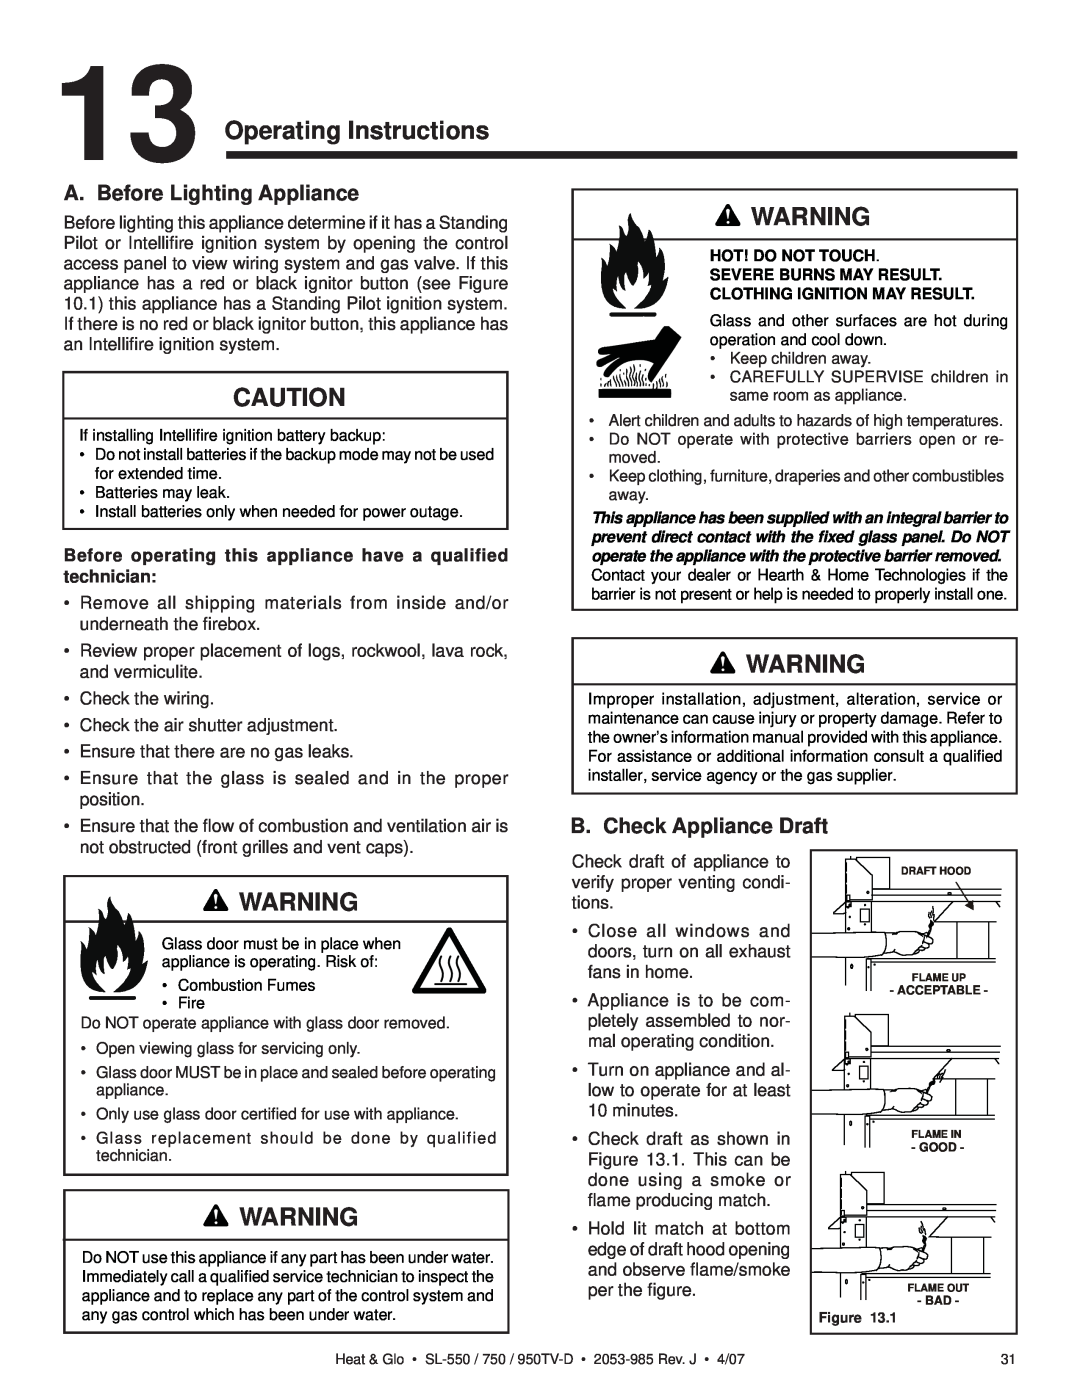 Heat & Glo LifeStyle SL-950TV-D, SL-550TV-D Operating Instructions, A. Before Lighting Appliance, B. Check Appliance Draft 